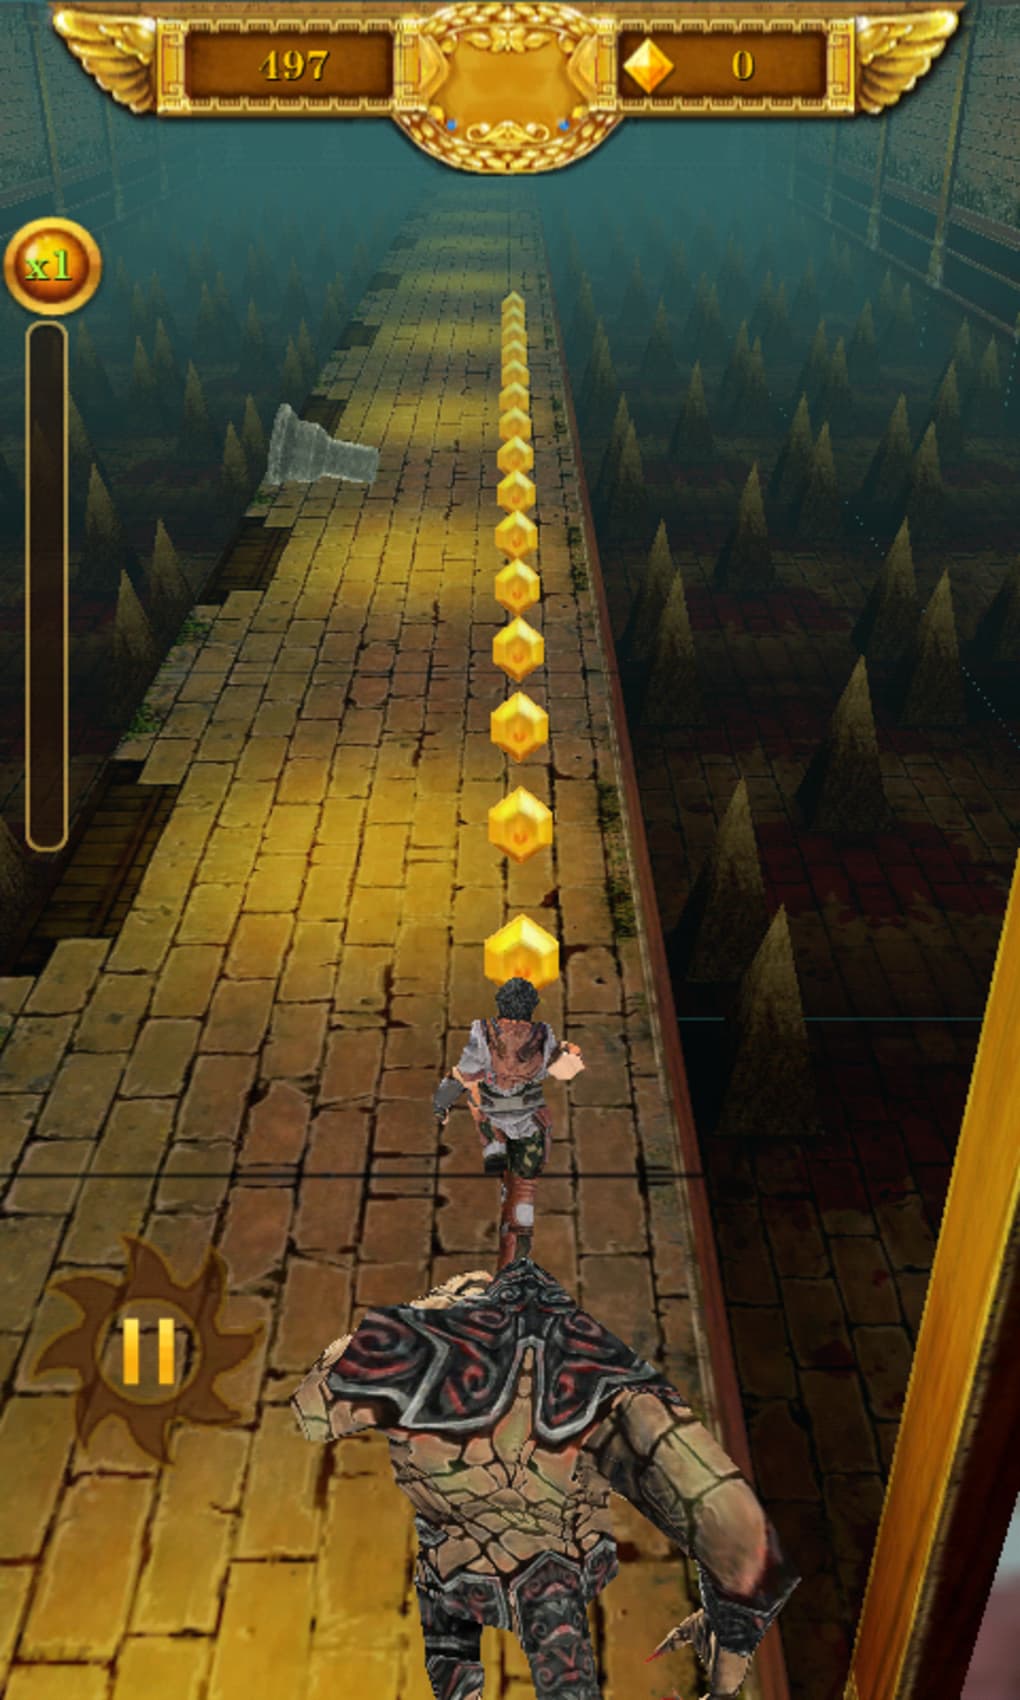 Angry Temple tomb run Temple Raider tomb Runner APK (Android Game) - Free  Download